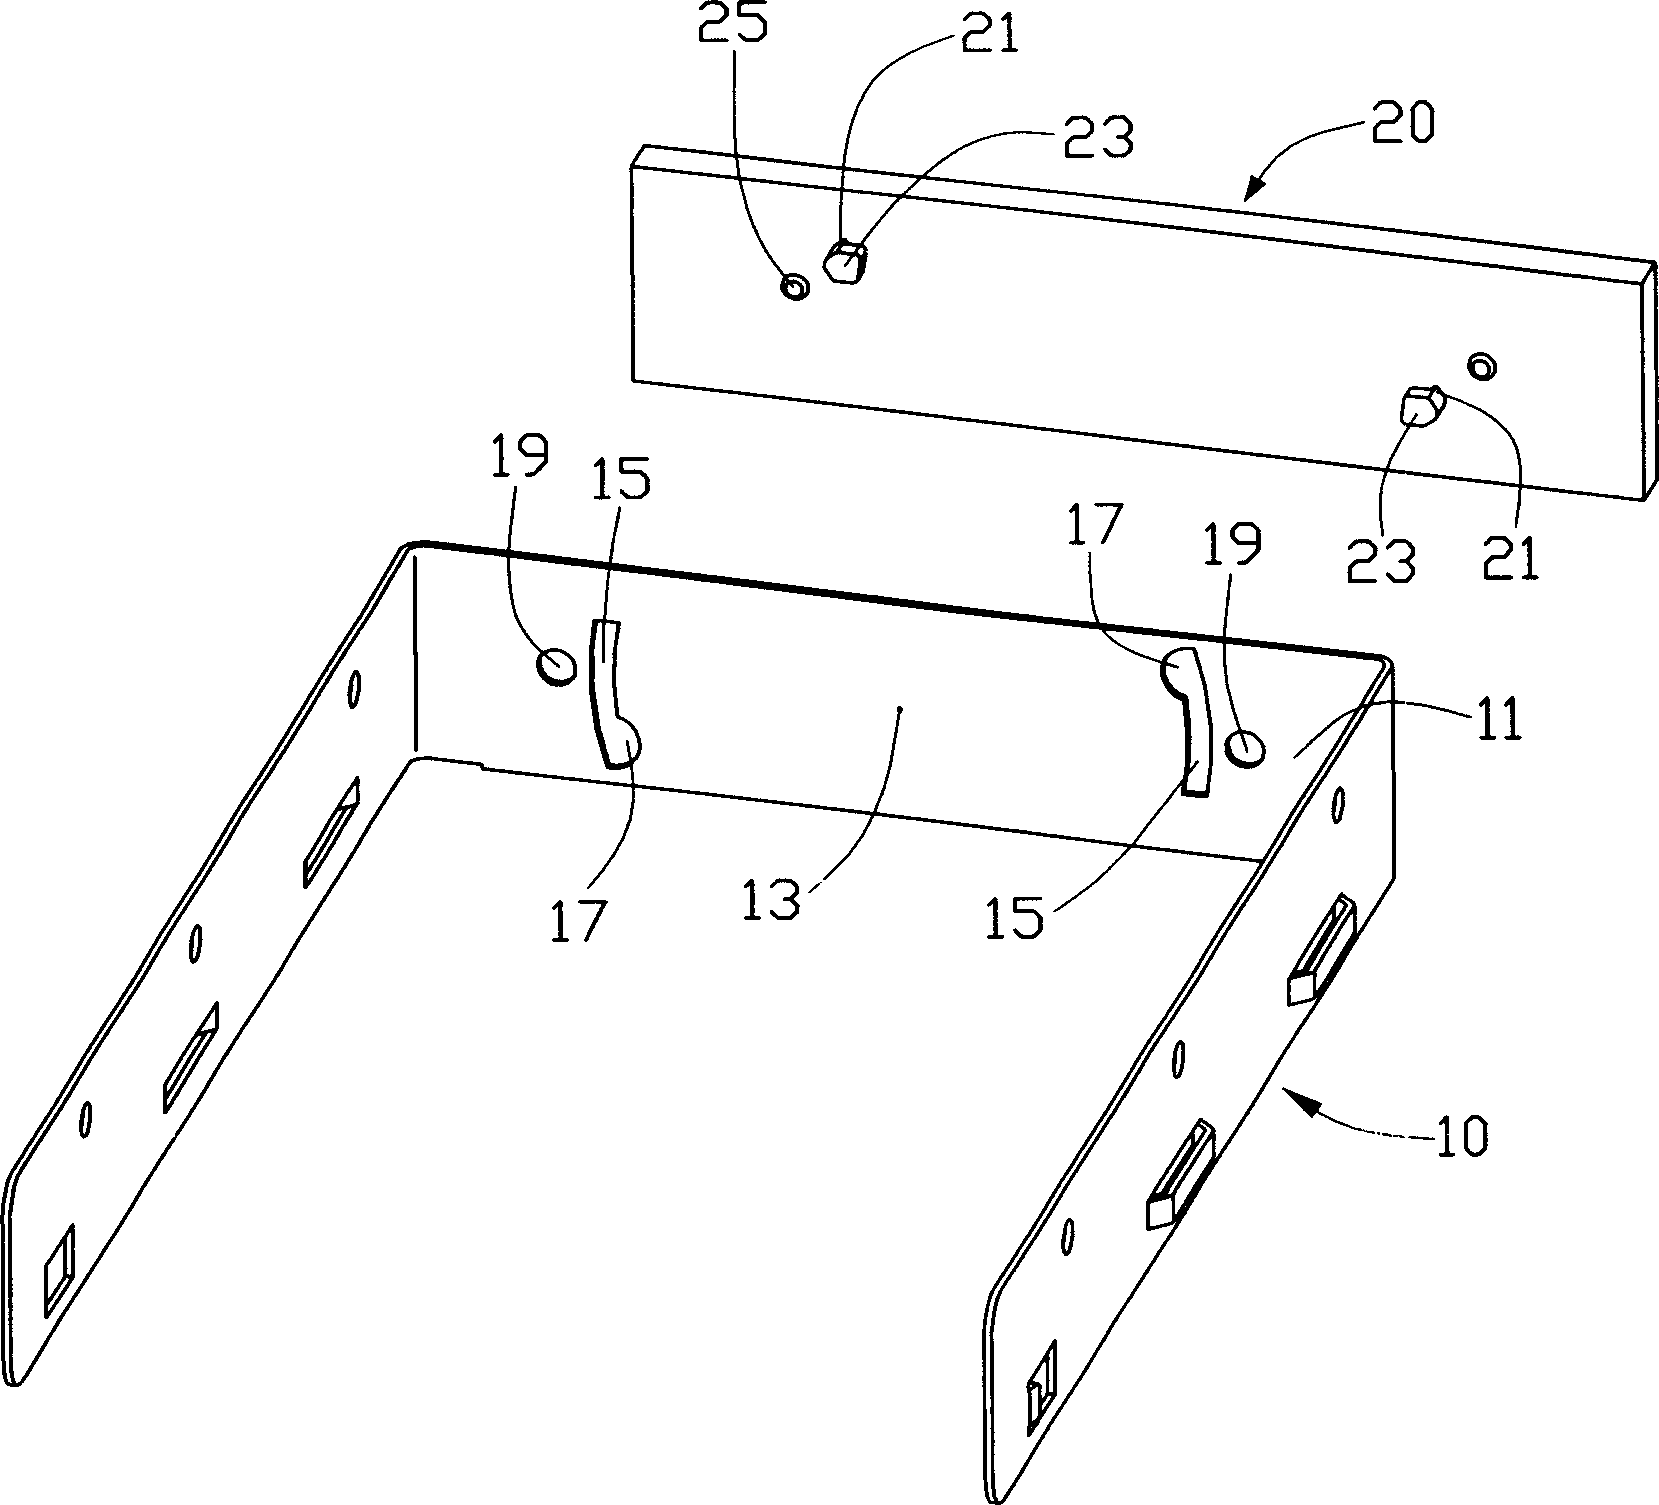 Front panel clamping and buckling method